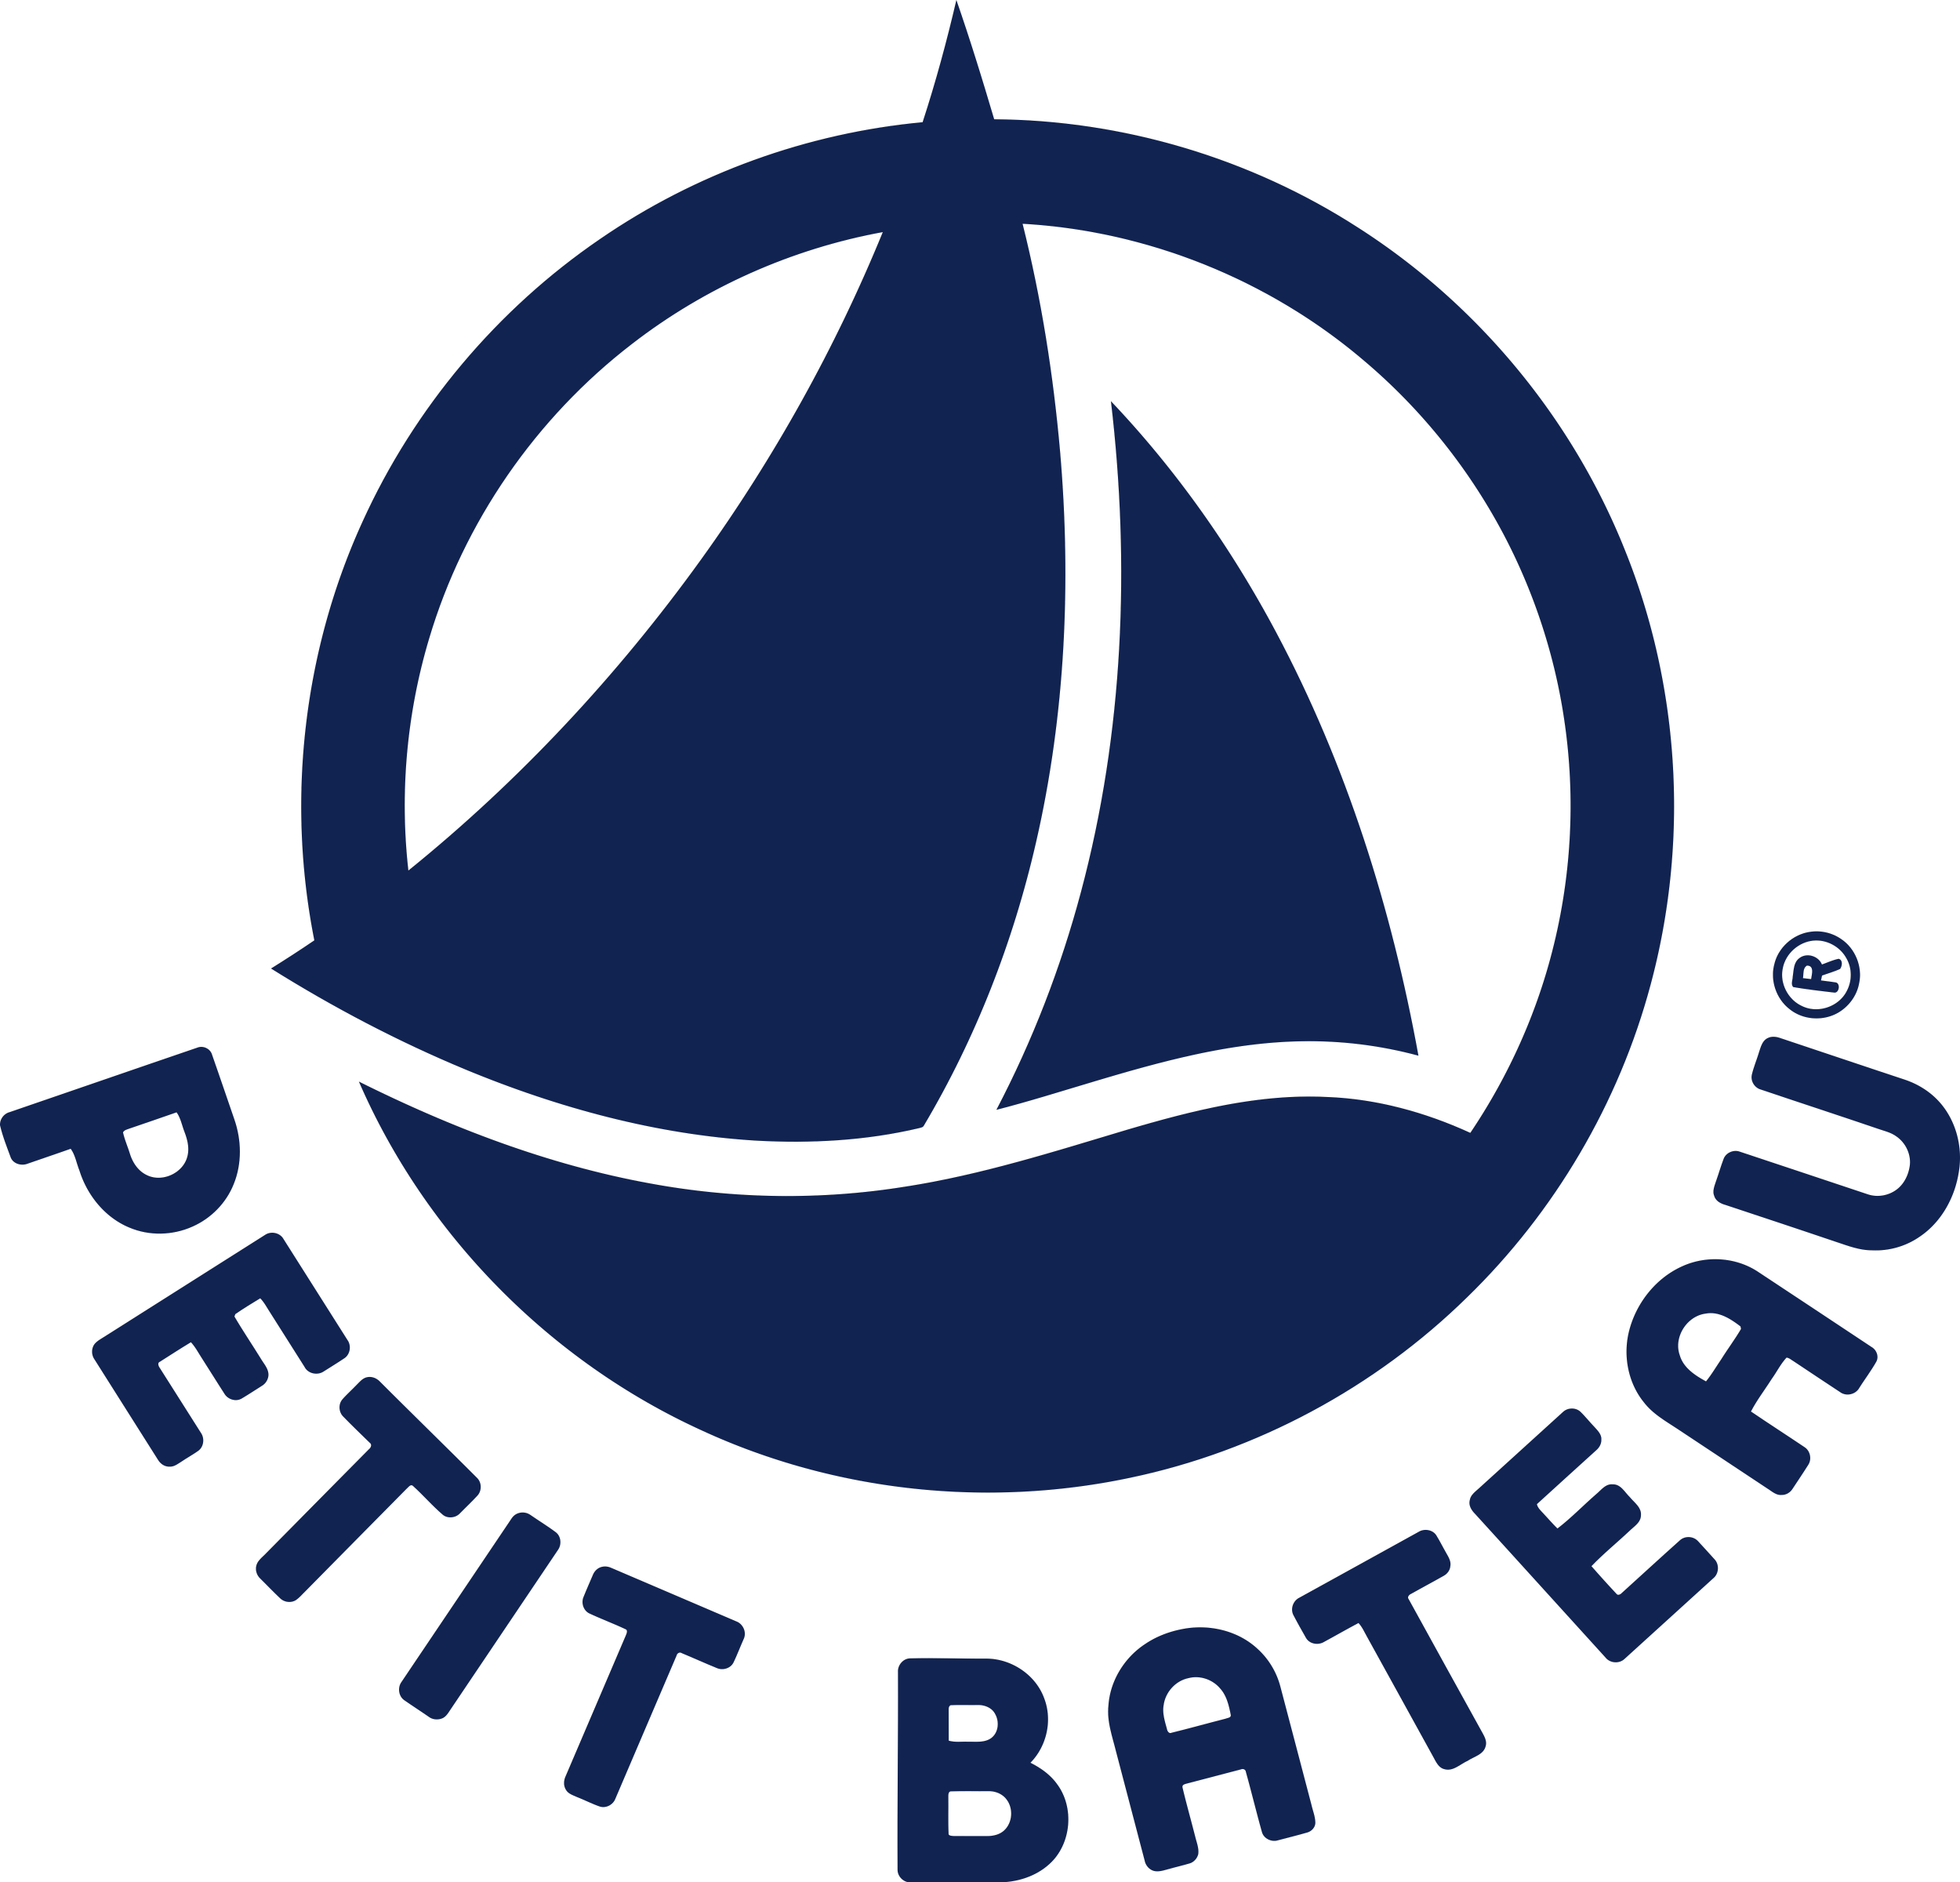 Petit Bateau Packaging Redesign - World Brand Design Society